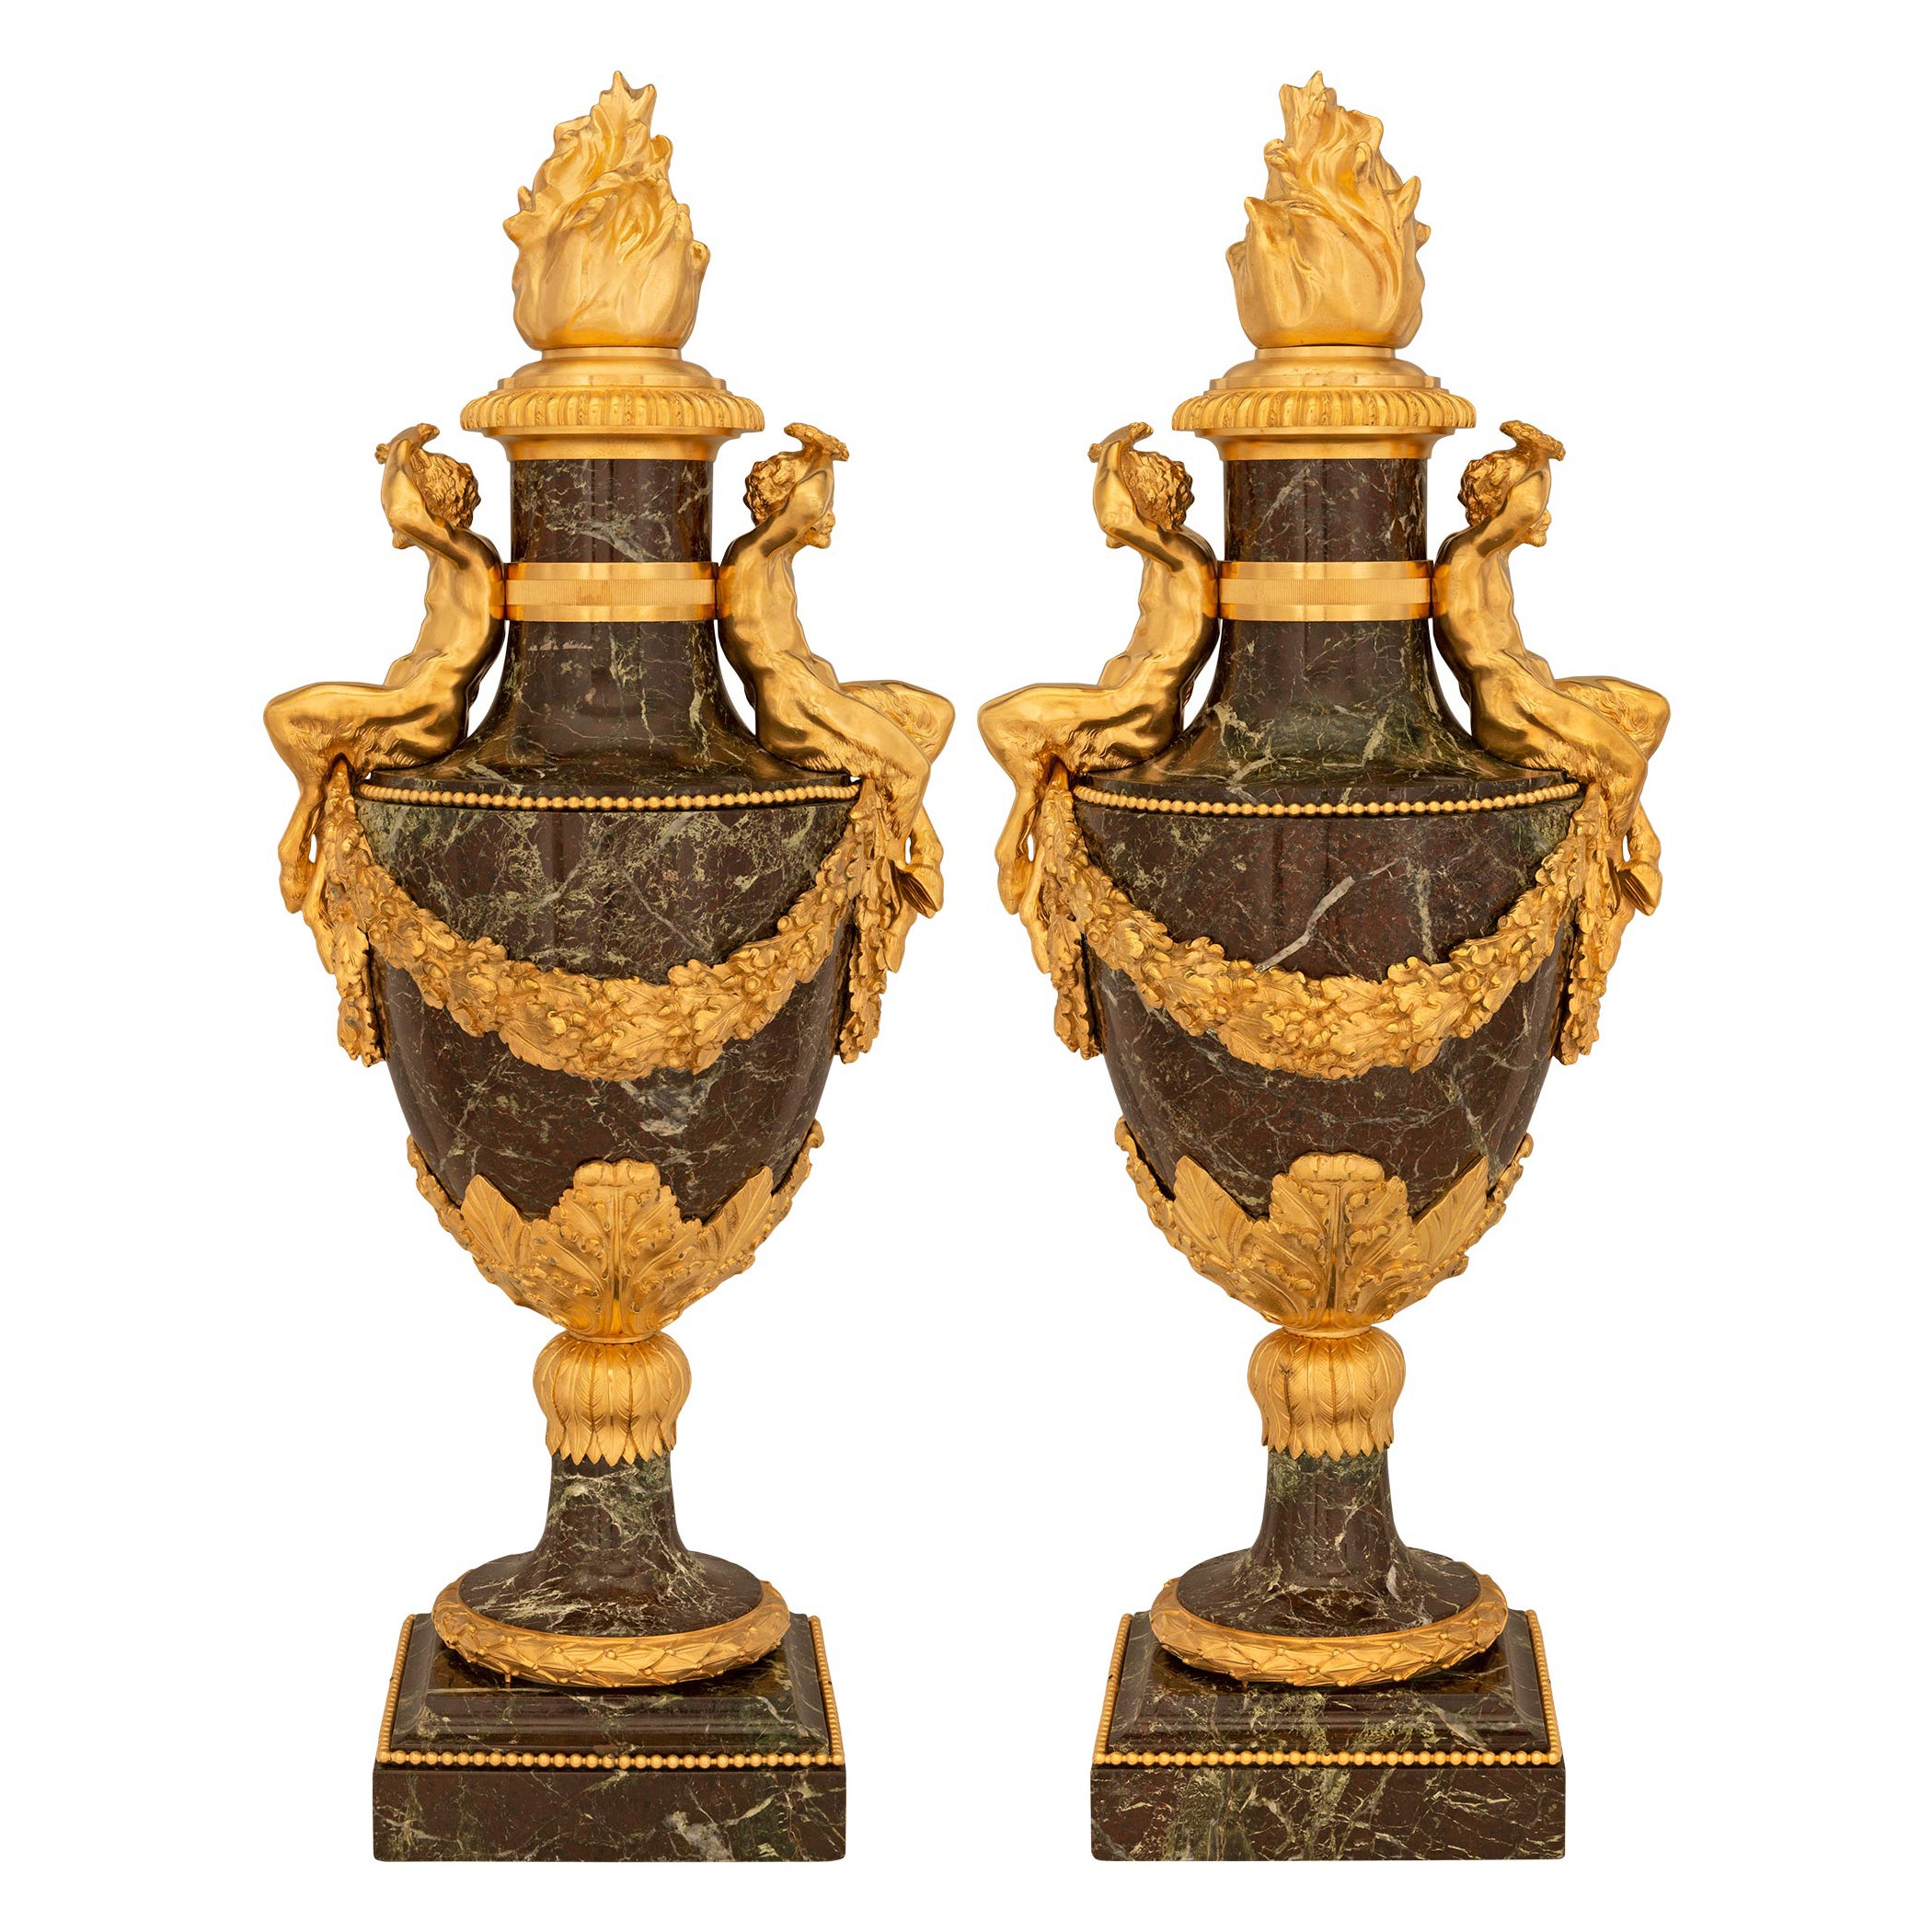 Pair of French 19th Century Belle Époque Period Marble and Ormolu Lidded Urns For Sale